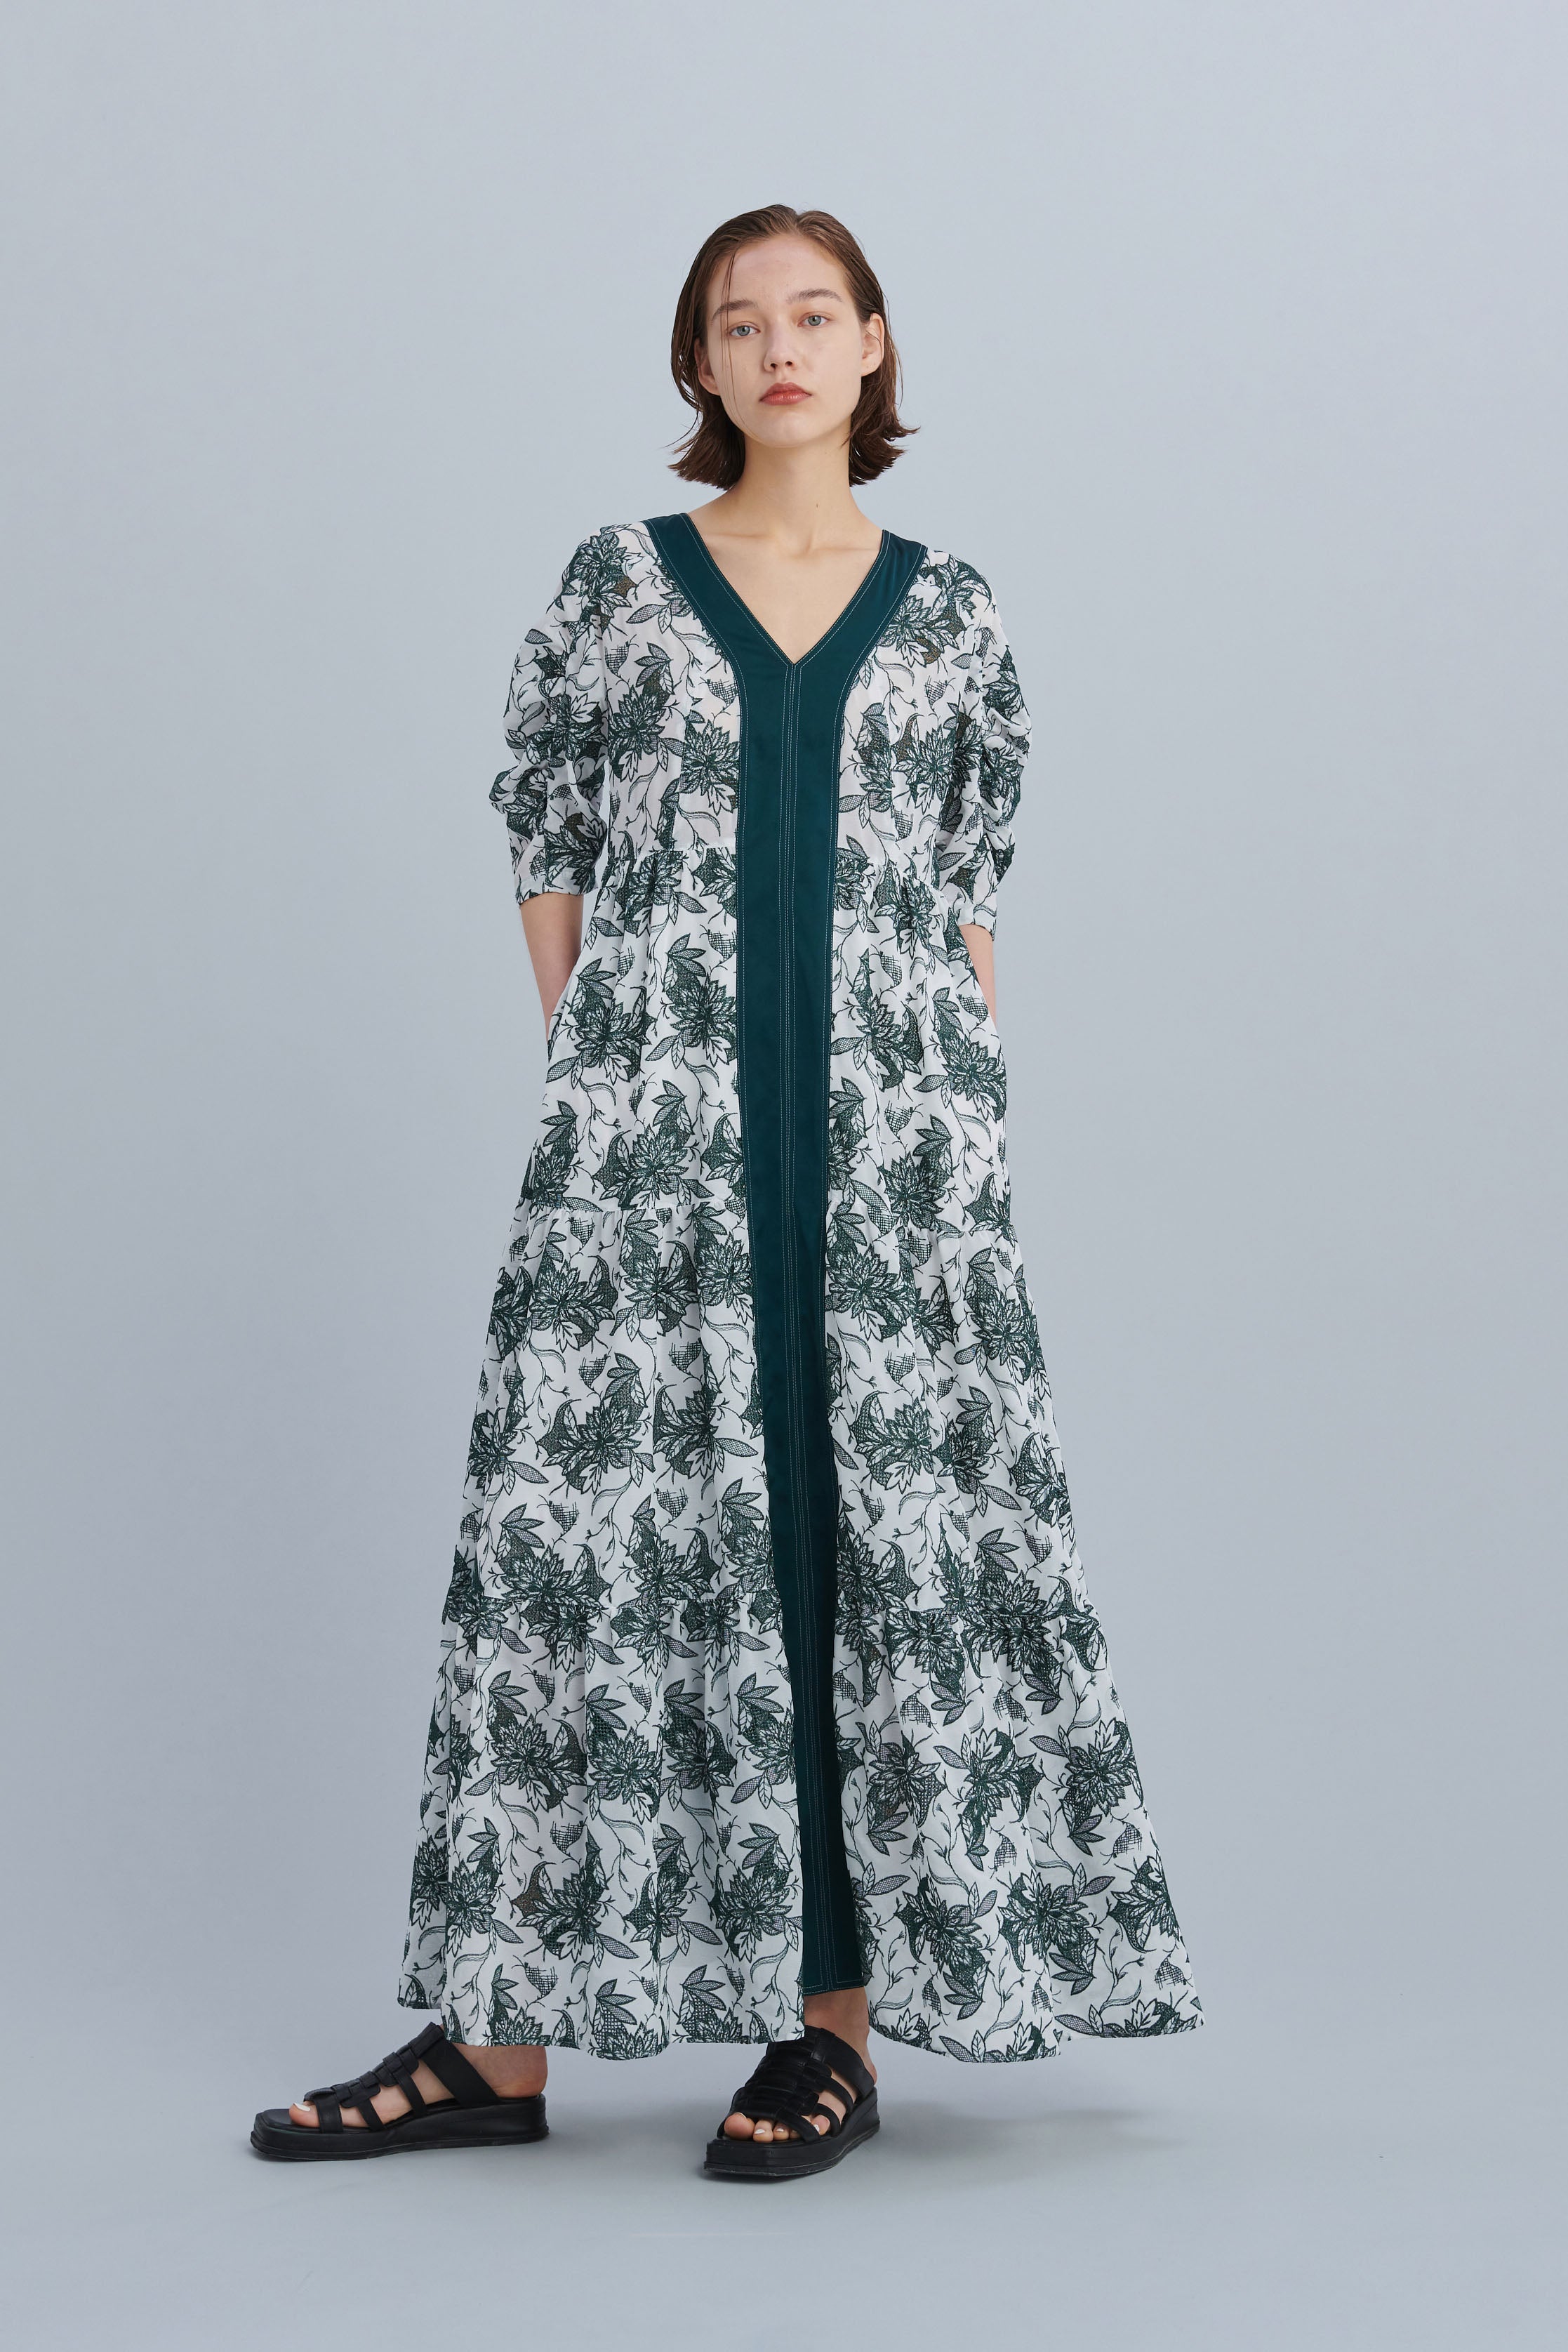 MURRAL Dahlia embroidery tiered dress